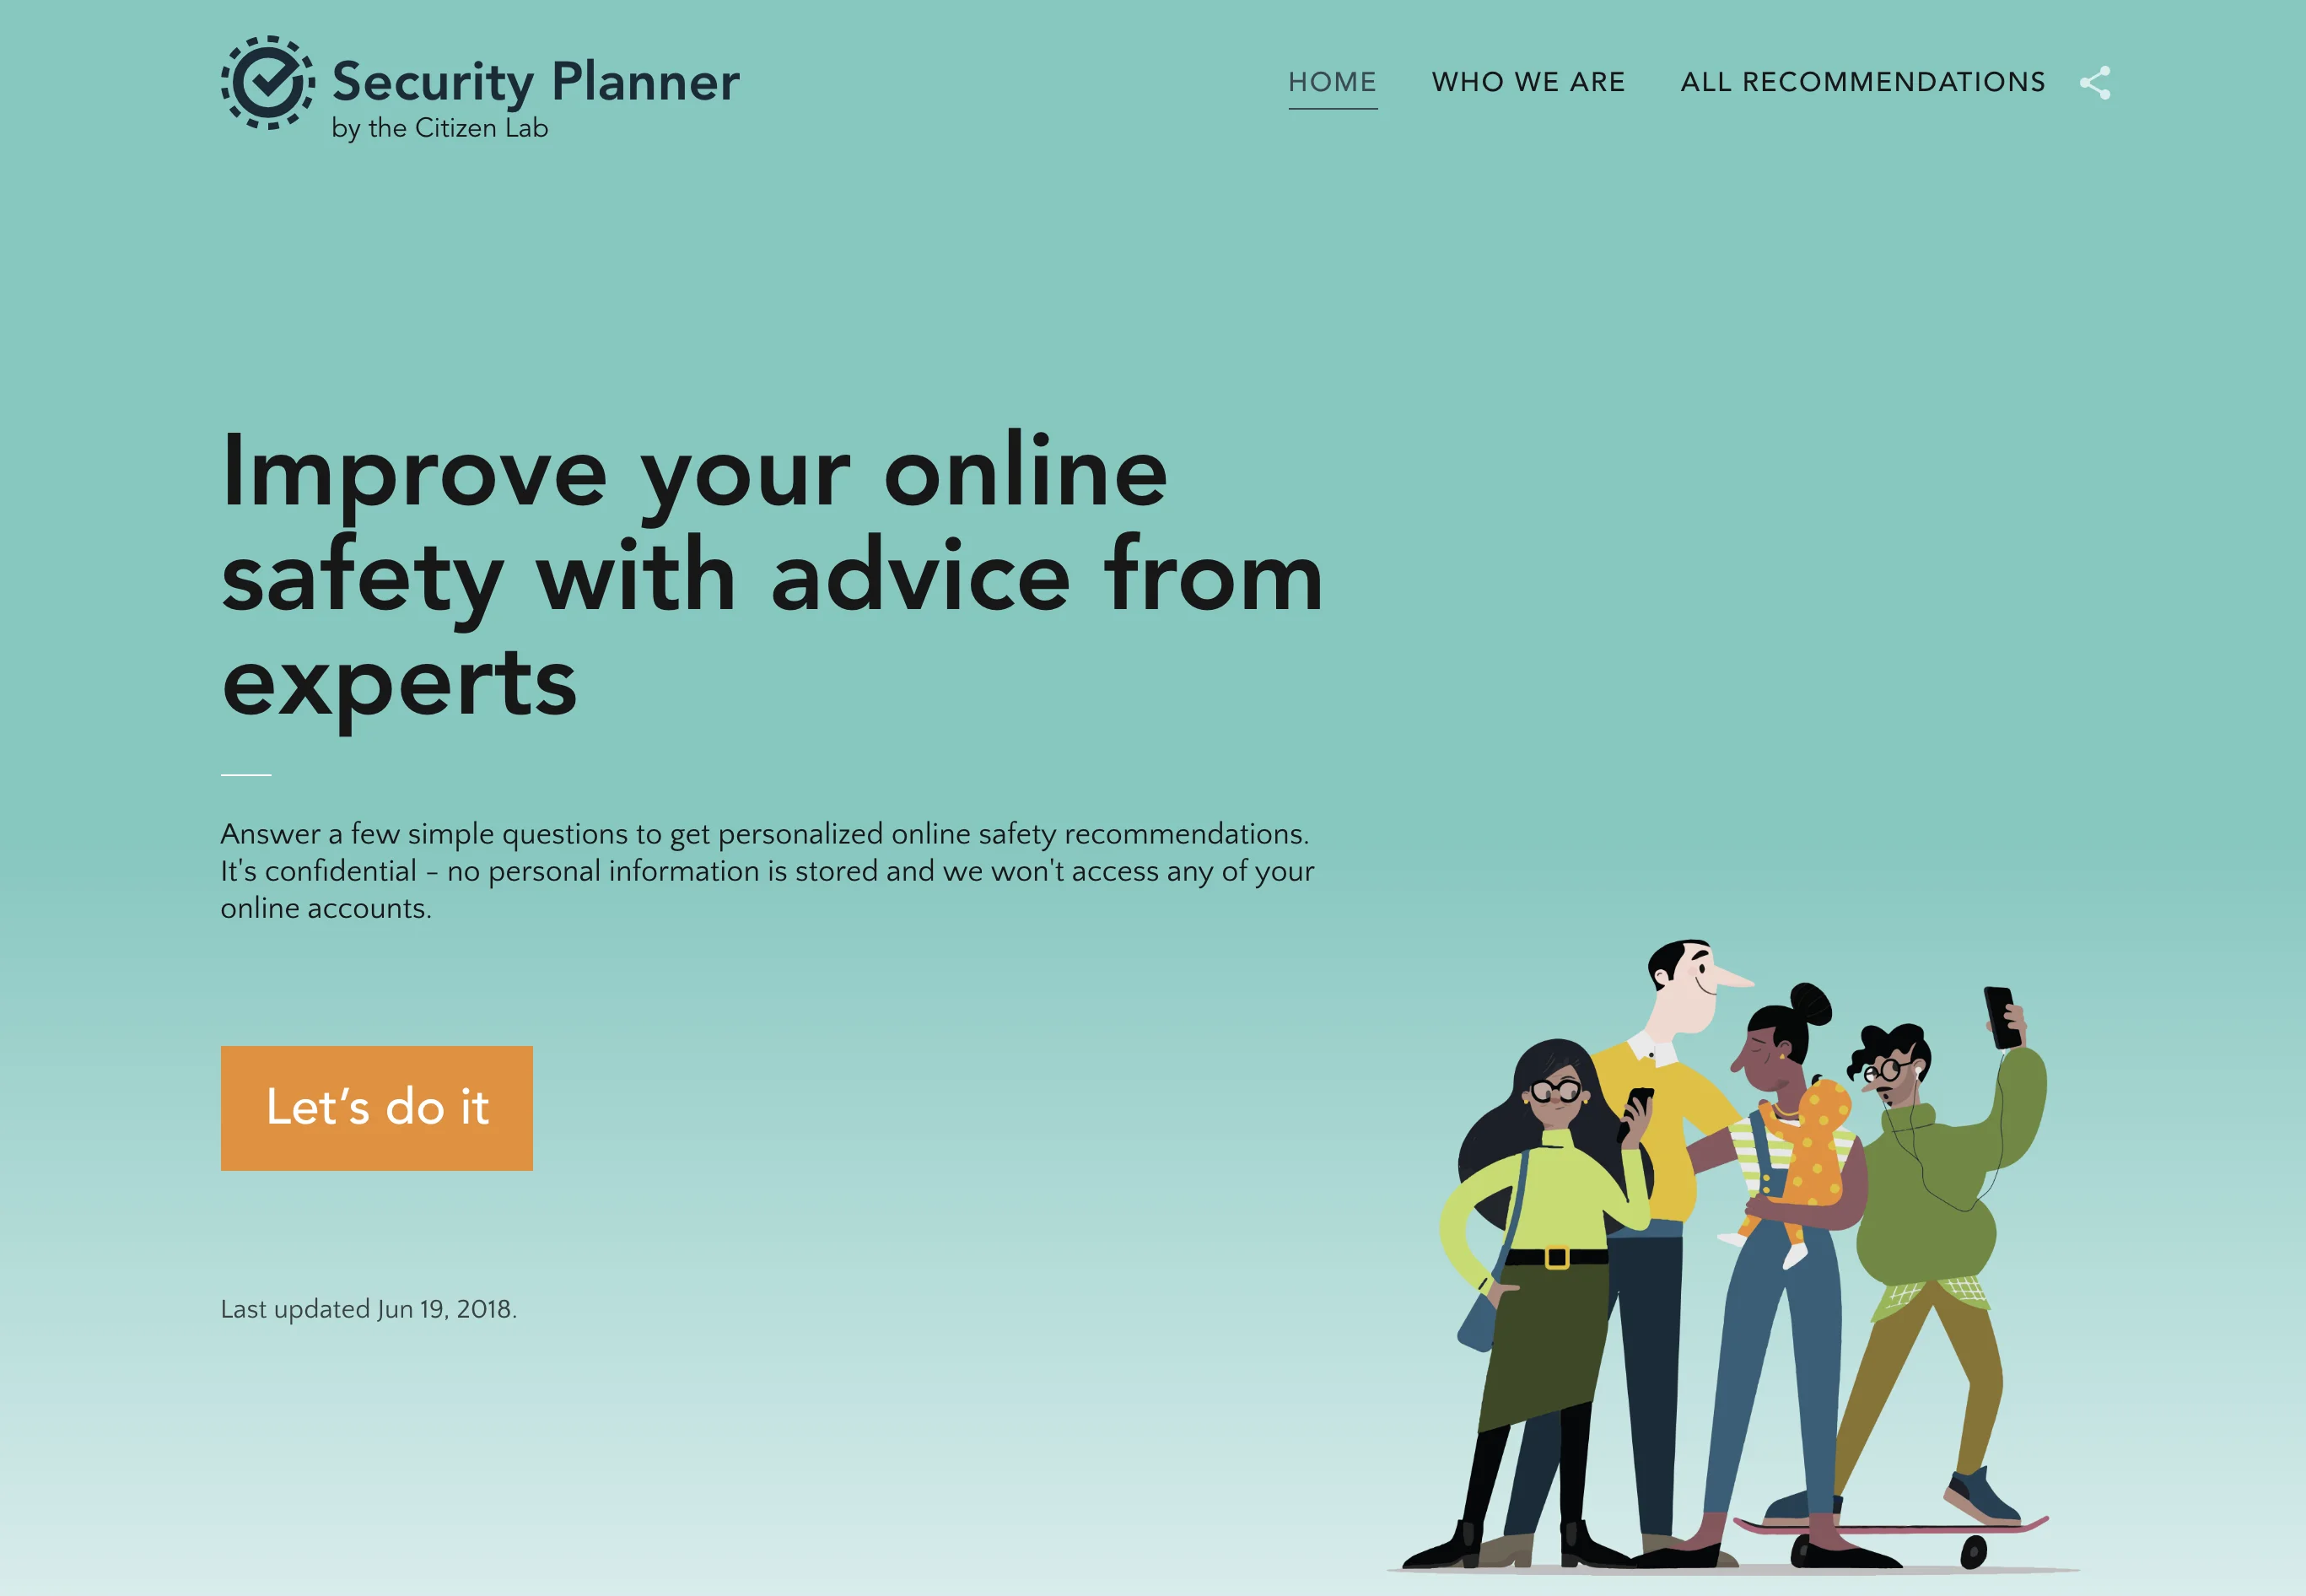 visit security planner to learn more about improving your online security